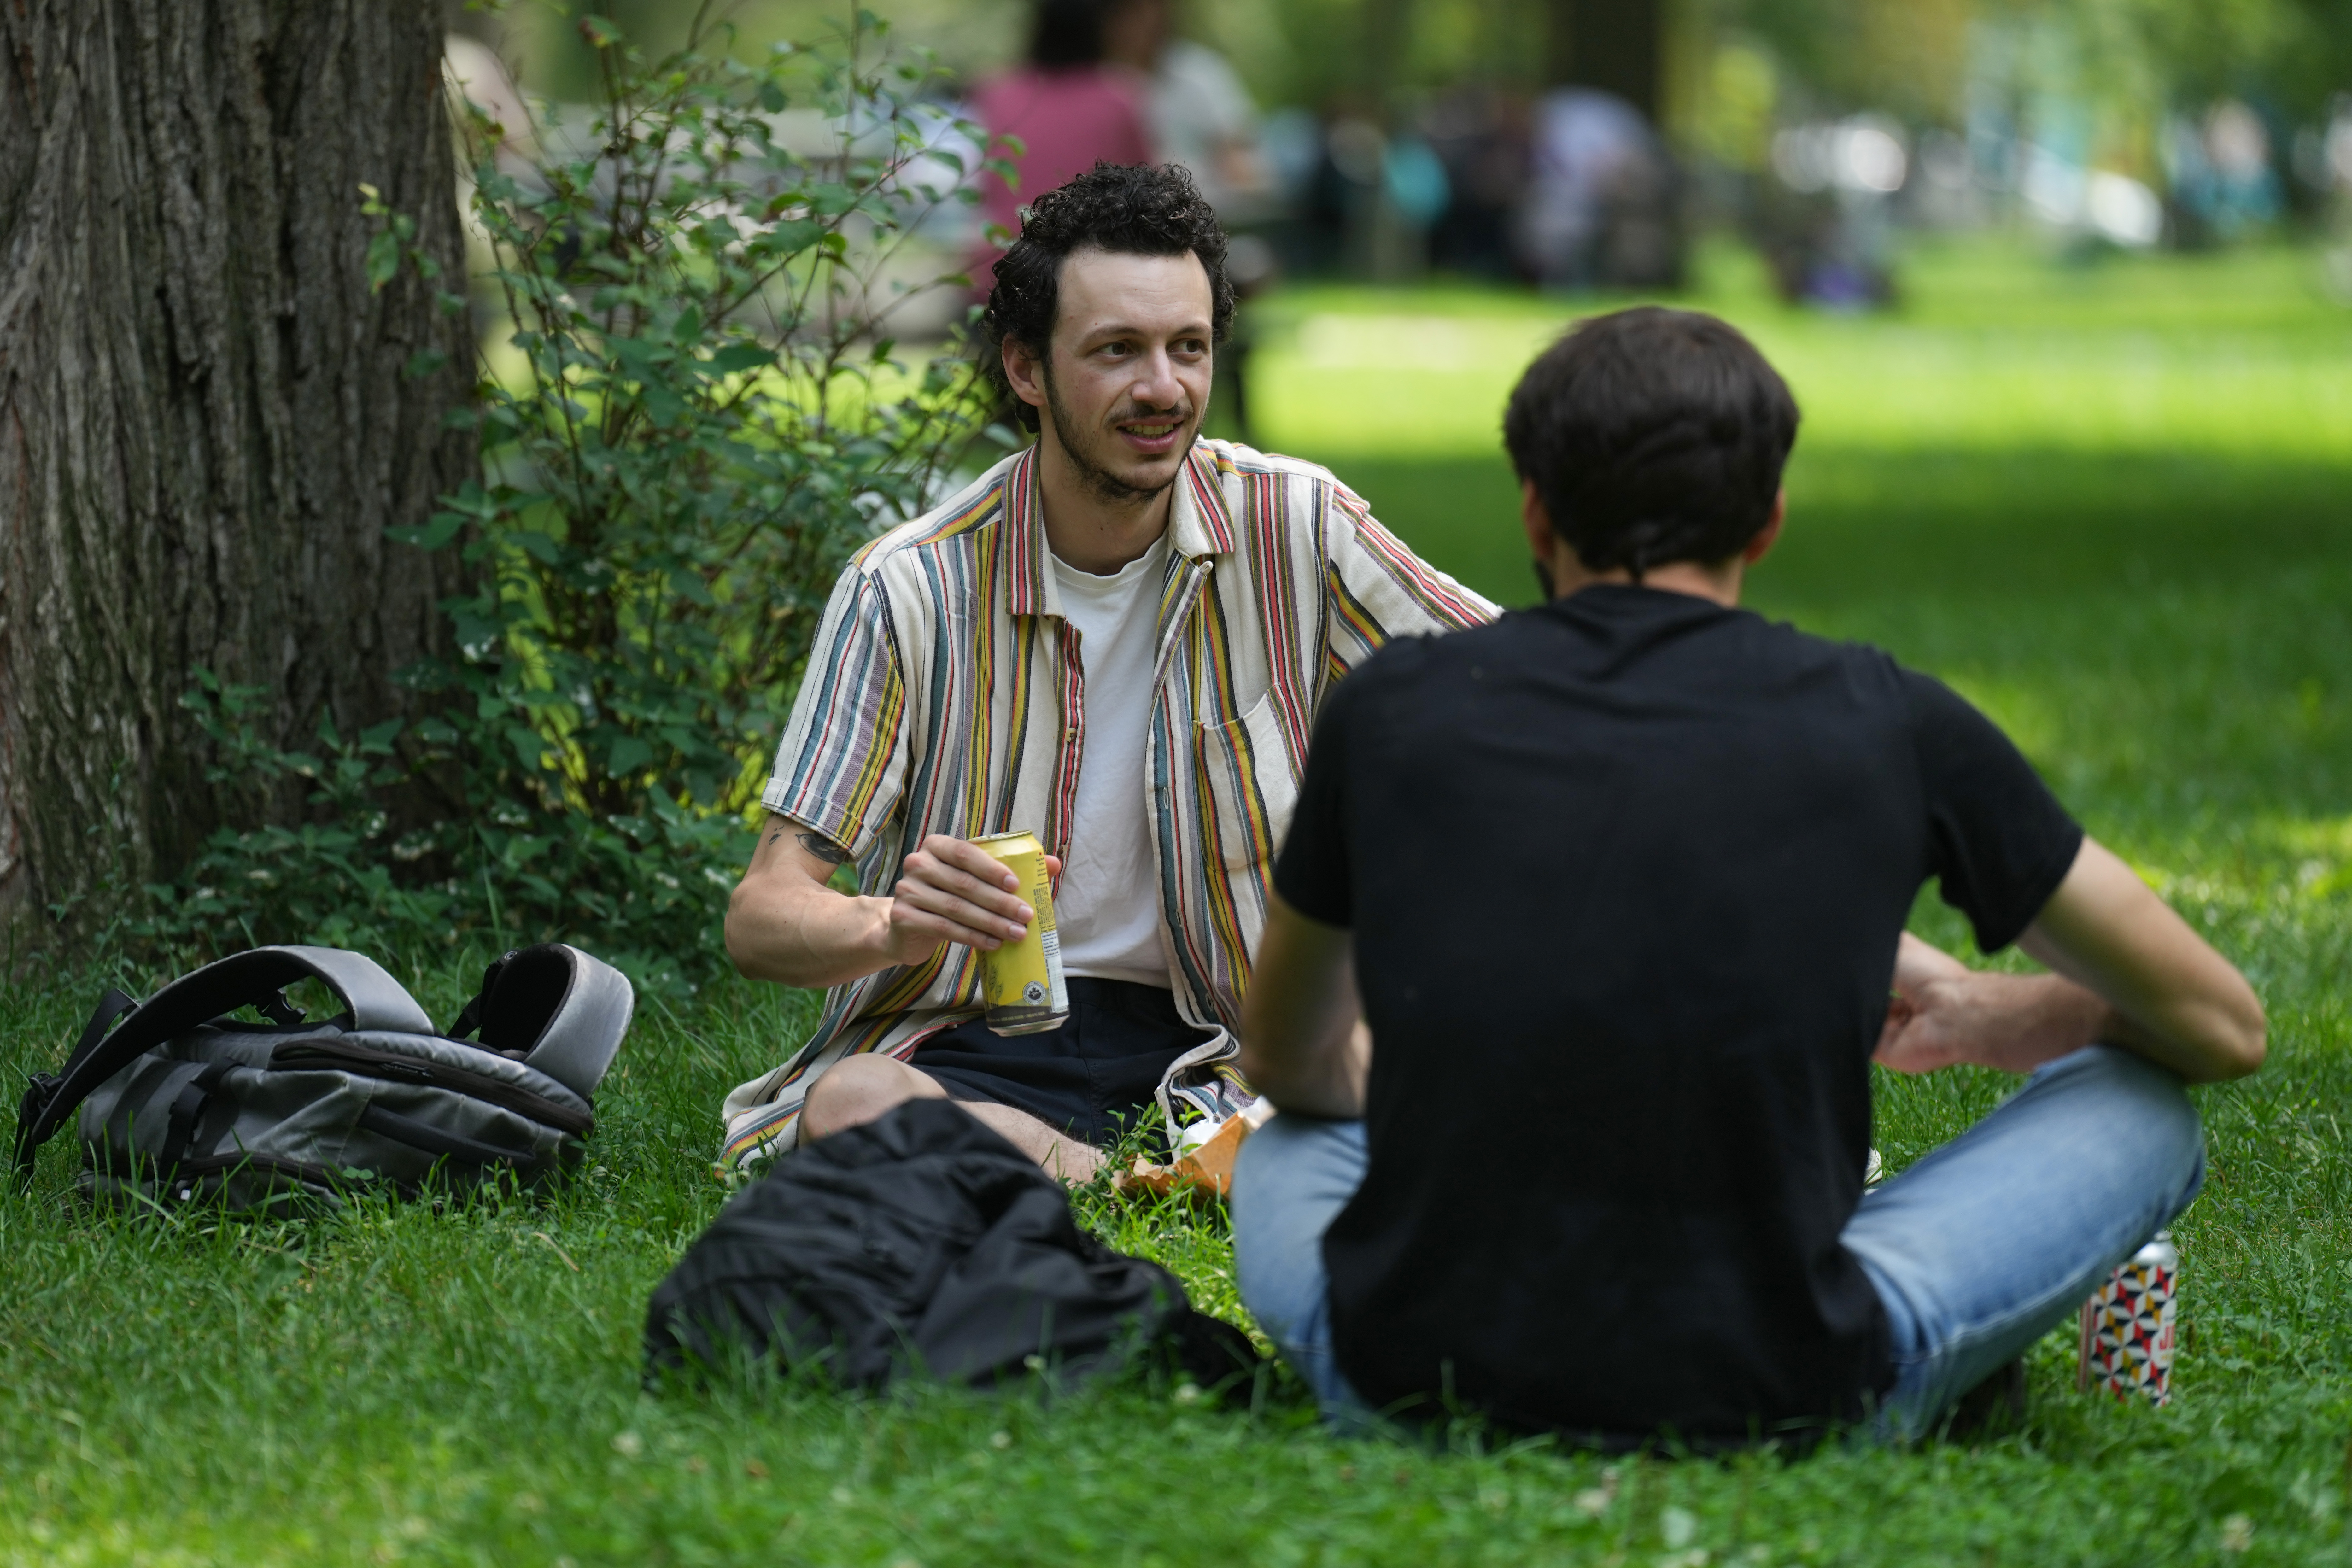 It could become easier to drink alcohol in Toronto parks. Here’s what’s changing